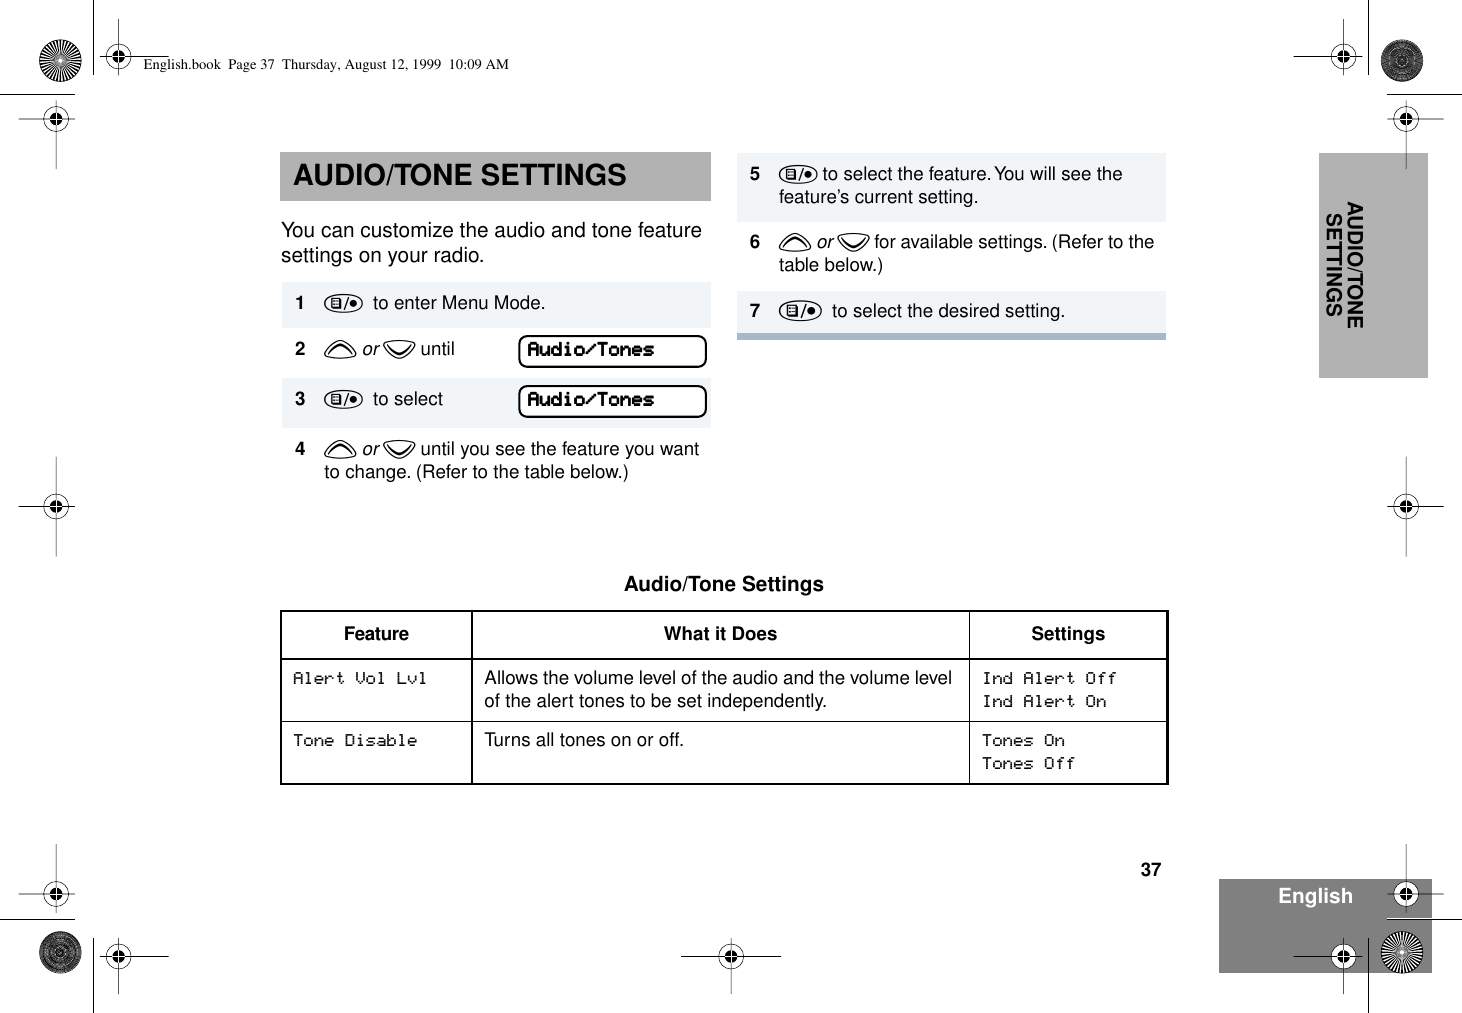 37EnglishAUDIO/TONE SETTINGSAUDIO/TONE SETTINGSYou can customize the audio and tone feature settings on your radio. 1)  to enter Menu Mode.2y or z until3)  to select4y or z until you see the feature you want to change. (Refer to the table below.)AAAAuuuuddddiiiioooo////TTTToooonnnneeeessssAAAAuuuuddddiiiioooo////TTTToooonnnneeeessss5) to select the feature. You will see the feature’s current setting.6y or z for available settings. (Refer to the table below.)7)  to select the desired setting. Audio/Tone SettingsFeature What it Does SettingsAlert Vol Lvl Allows the volume level of the audio and the volume level of the alert tones to be set independently.Ind Alert OffInd Alert OnTone Disable Turns all tones on or off. Tones OnTones OffEnglish.book  Page 37  Thursday, August 12, 1999  10:09 AM